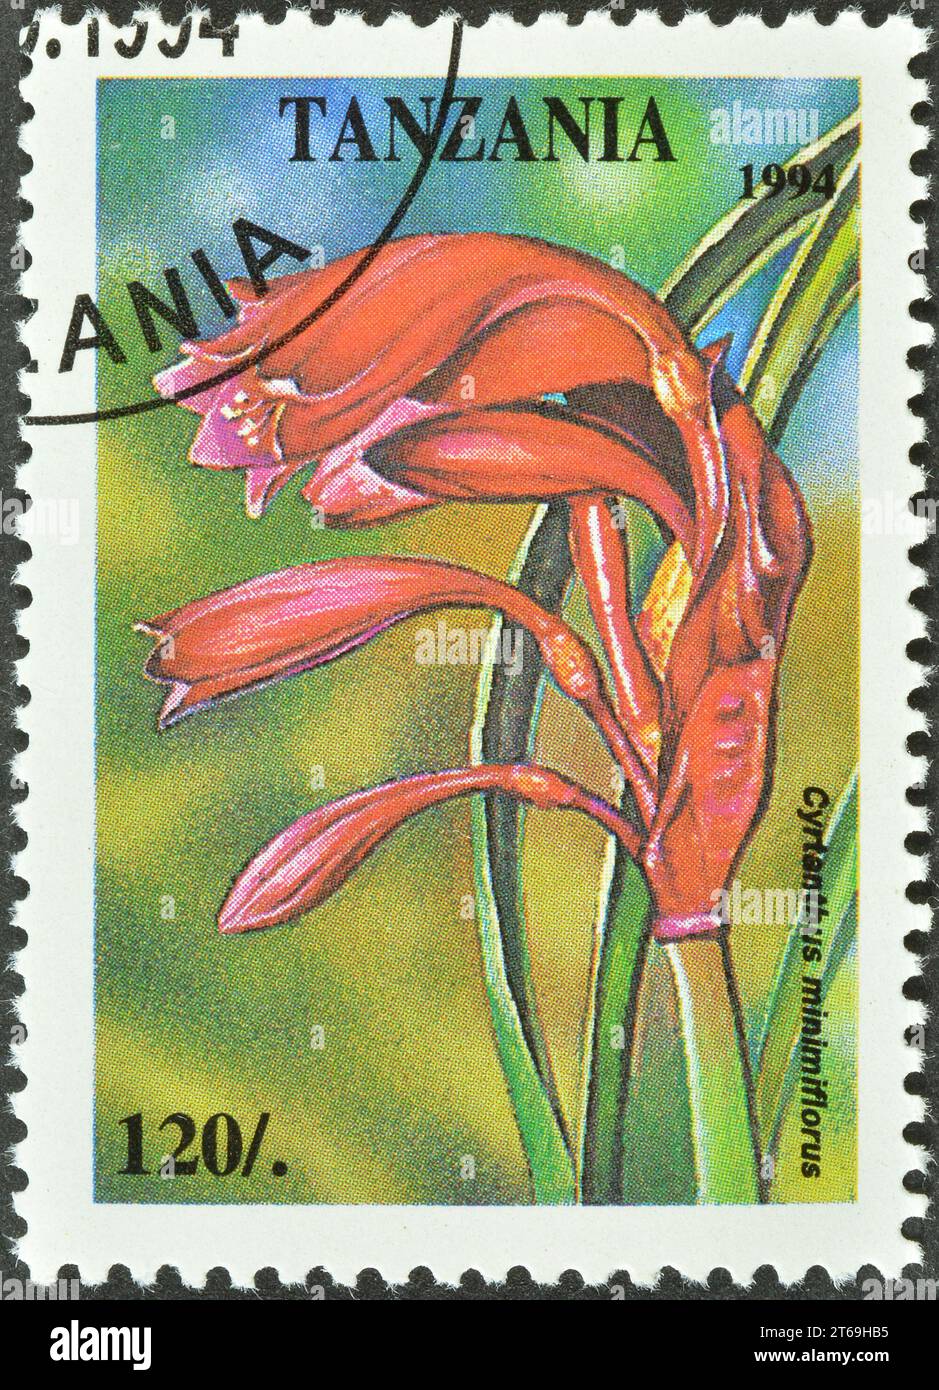 Cancelled postage stamp printed by Tanzania, that shows Cyrtanthus minimiflorus, Tropical flowers, circa 1994. Stock Photo